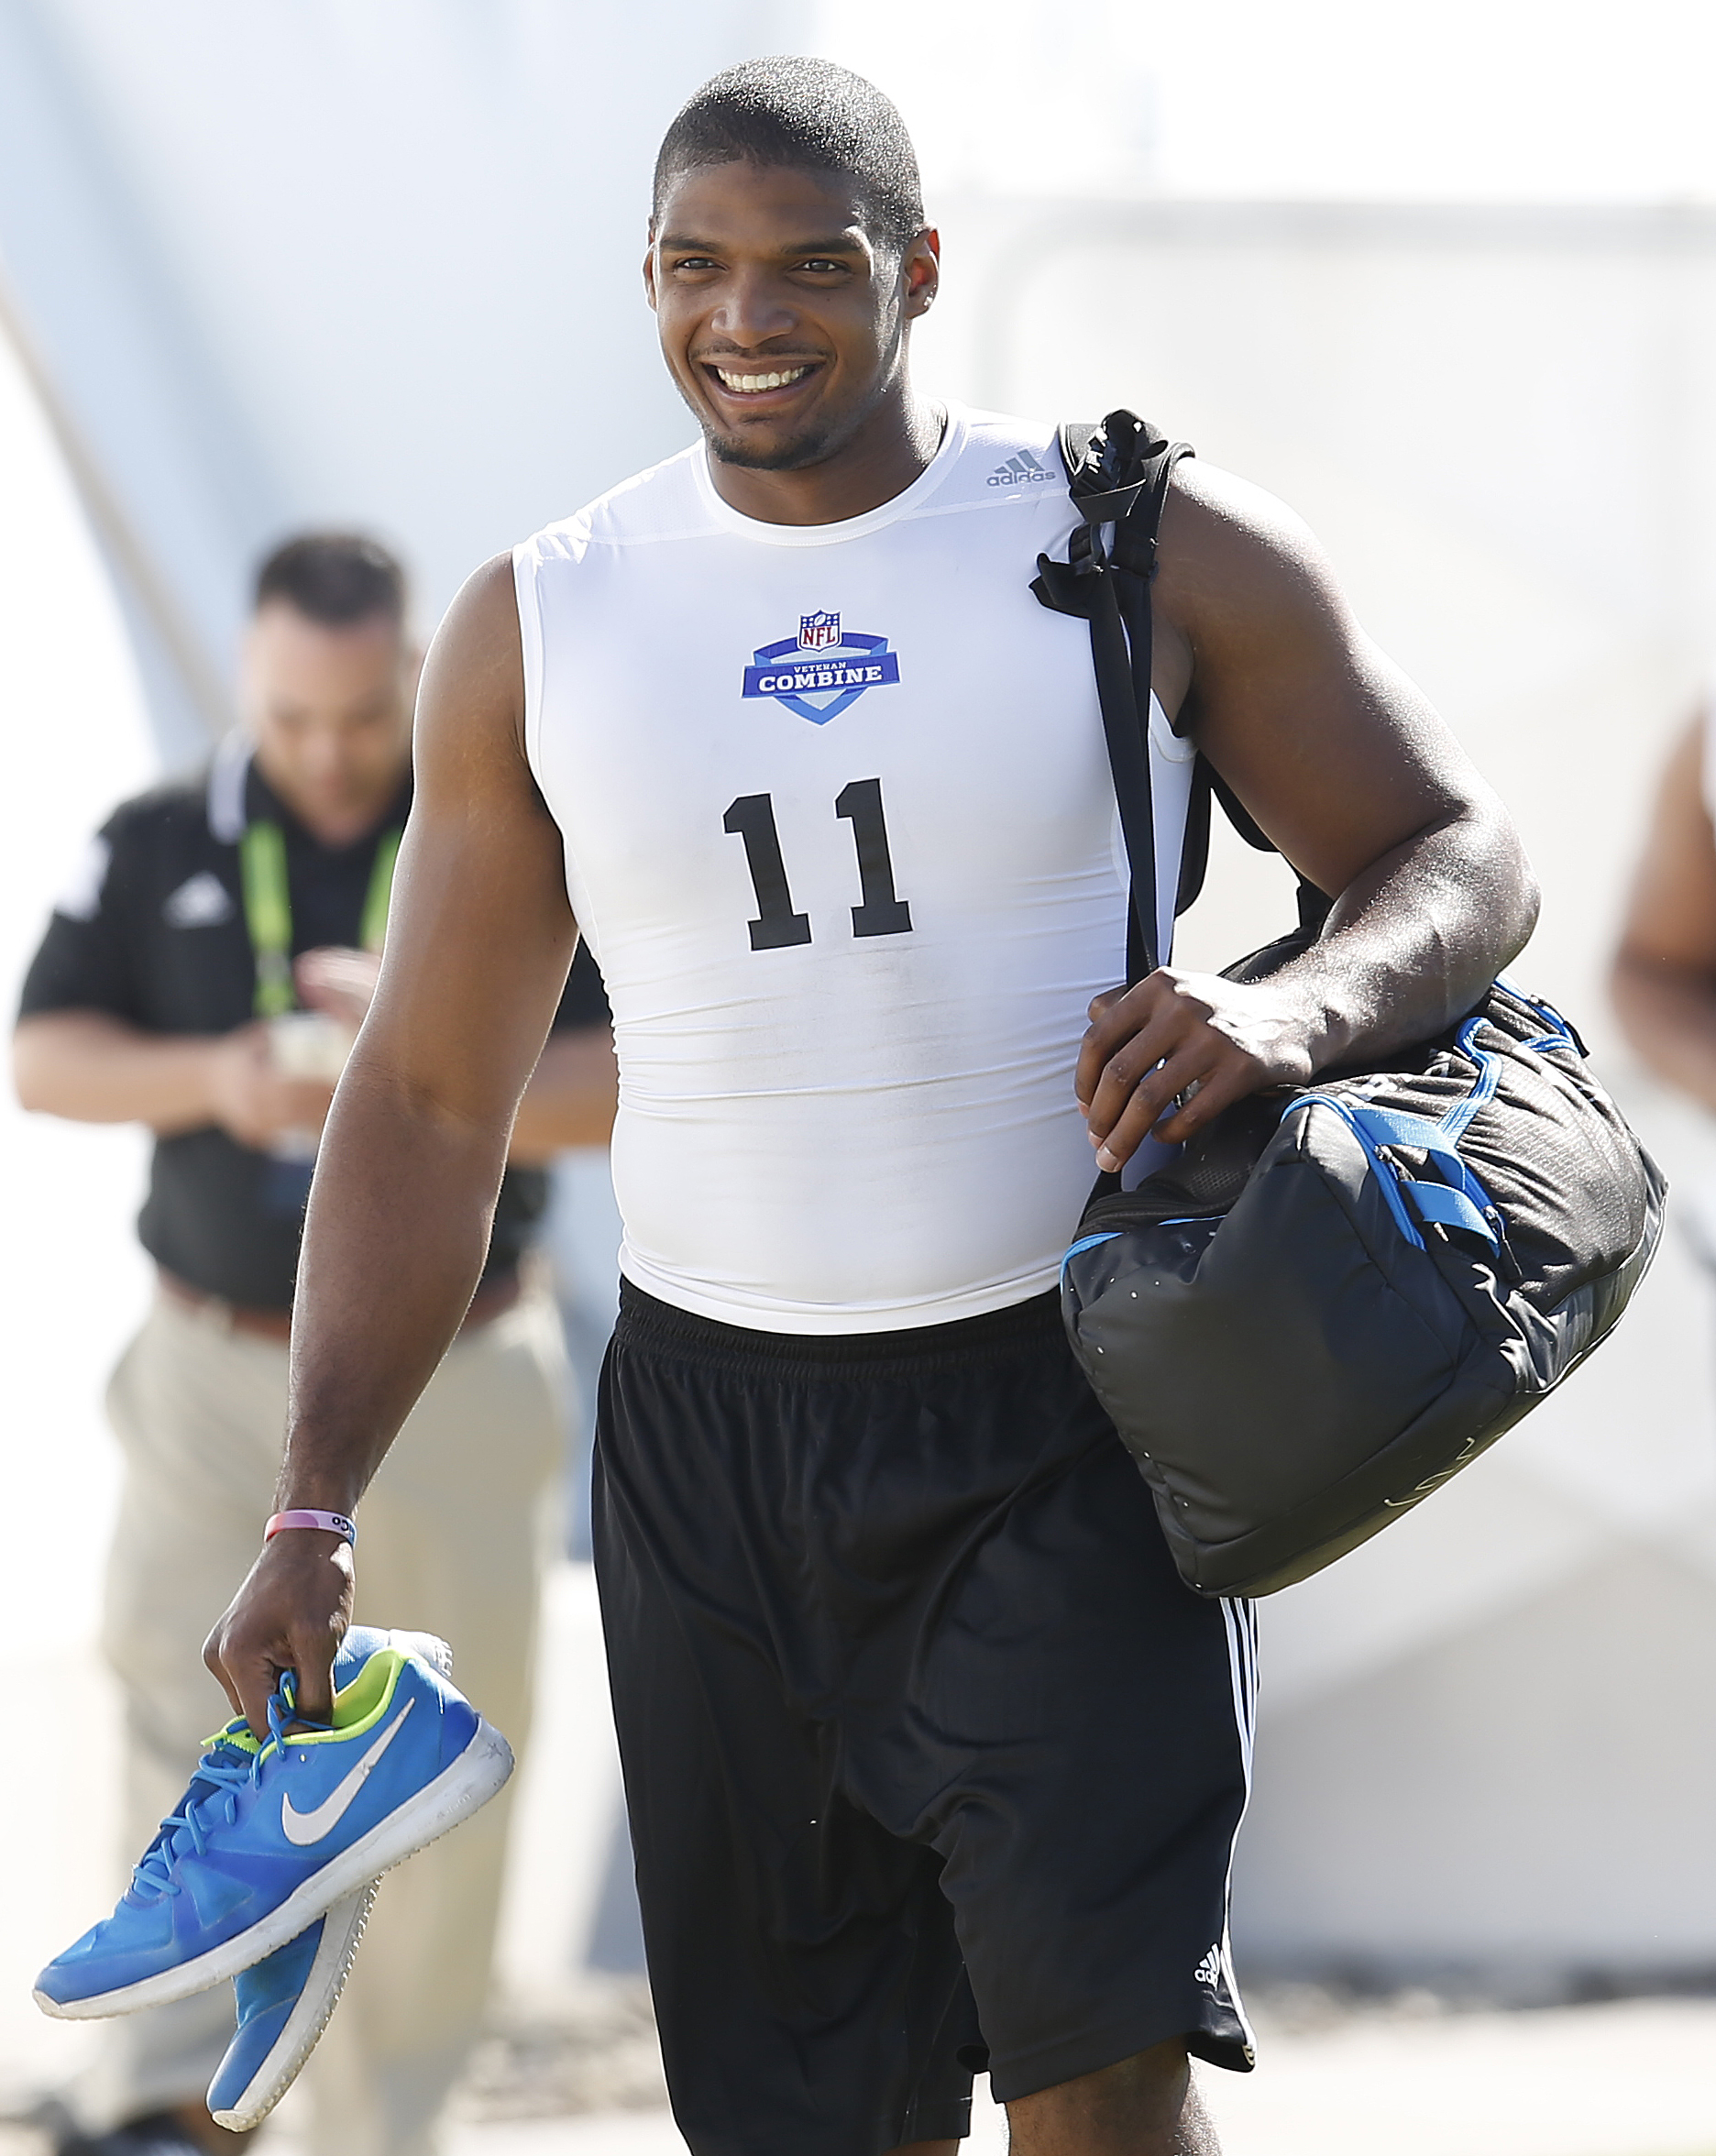 Defensive End Michael Sam, from Missouri, arrives before the NFL Super Regional Combine football workout on March 22, 2015 in Tempe, Ariz. (Rick Scuteri—AP)